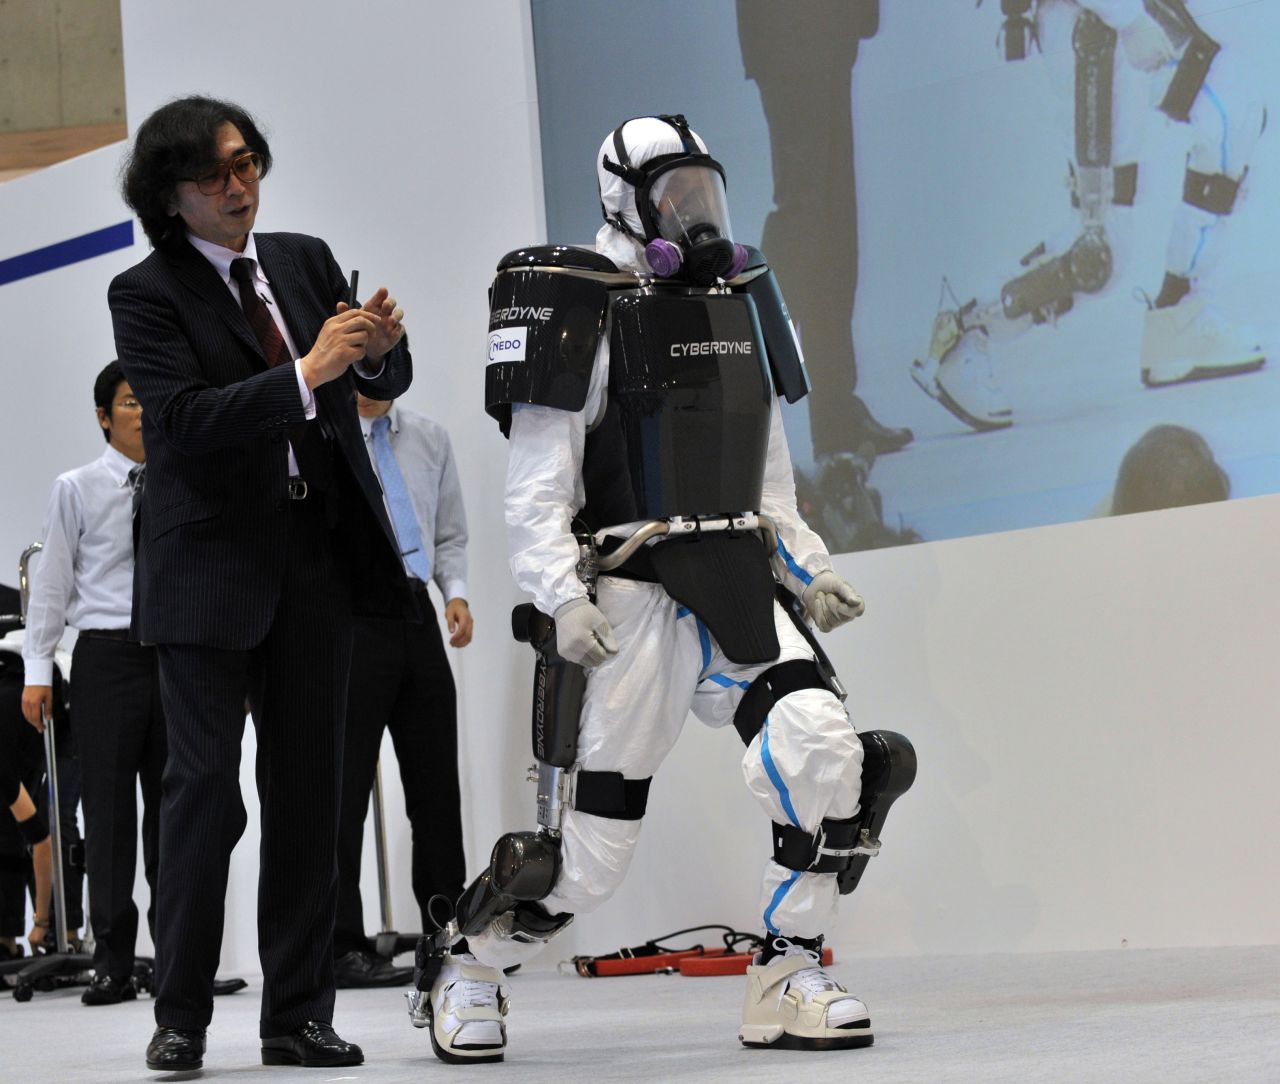 Cyberdyne's HAL-5 suit could take rescue workers into dangerous zones in the future. For now, it is allowing hundreds of Japanese patients suffering from muscle weakness to get around. 